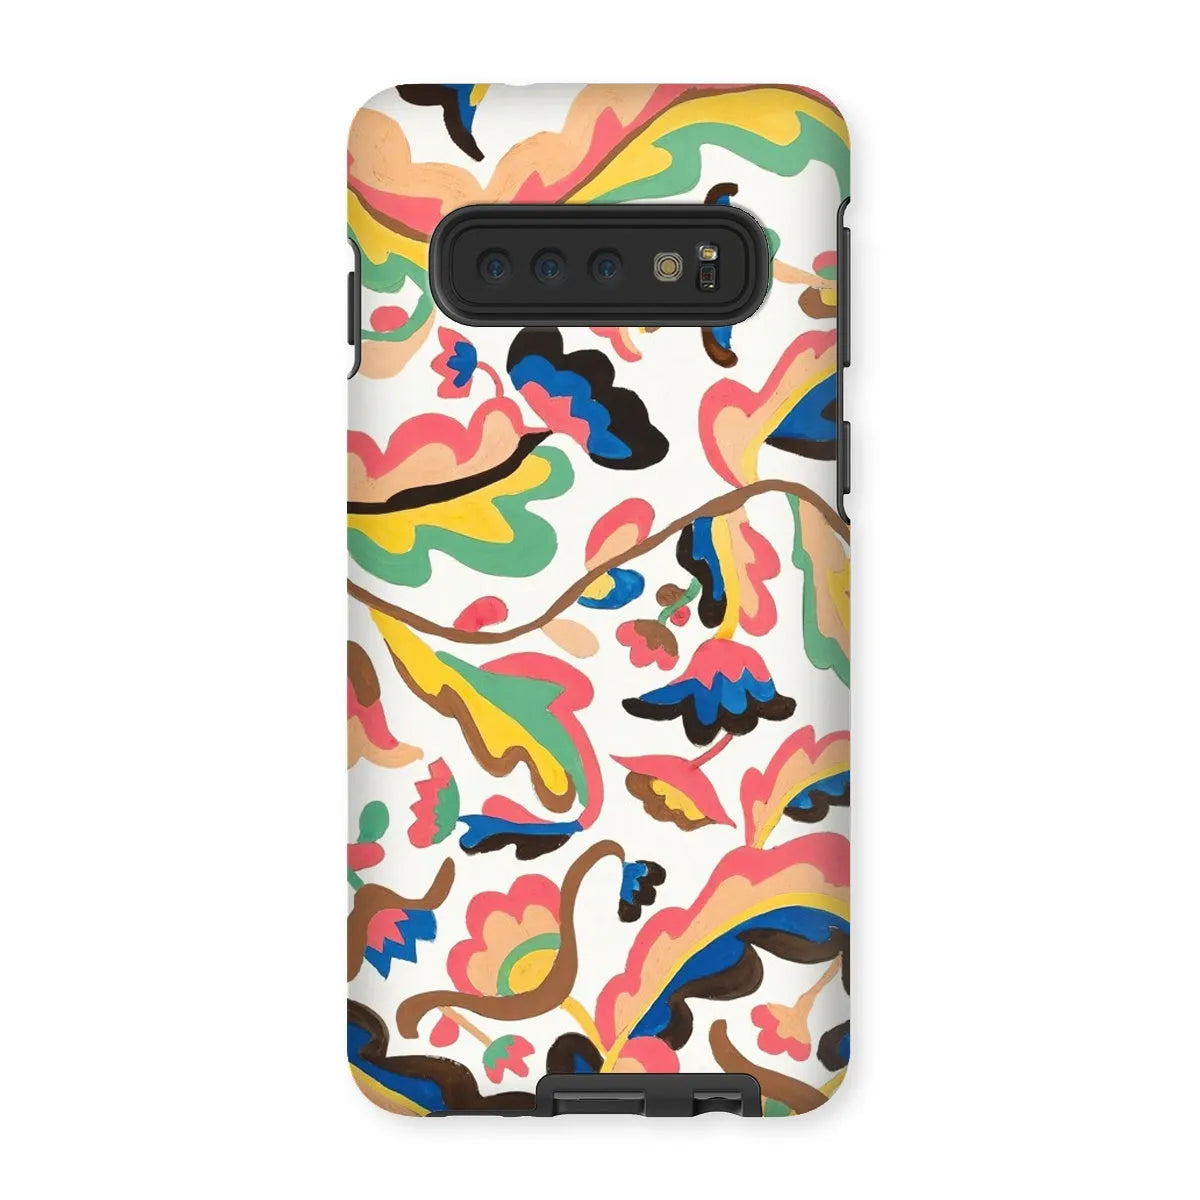 Colcha Floral Aesthetic Pattern Phone Case - Etna Wiswall - Samsung Galaxy S10 / Matte - Mobile Phone Cases - Aesthetic